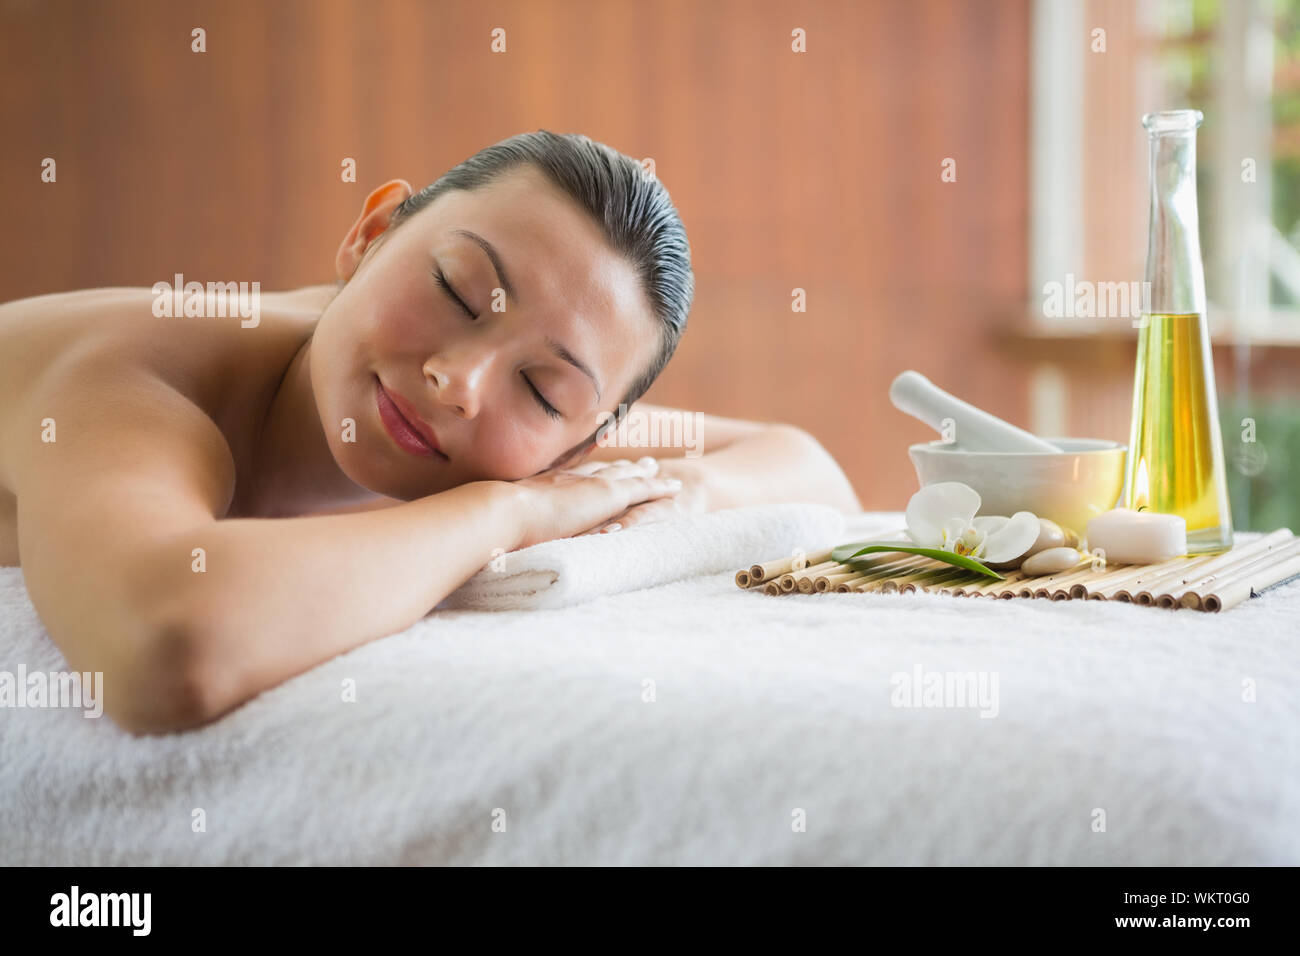 Brunette lying on massage table with tray of beauty treatments at the health spa Stock Photo